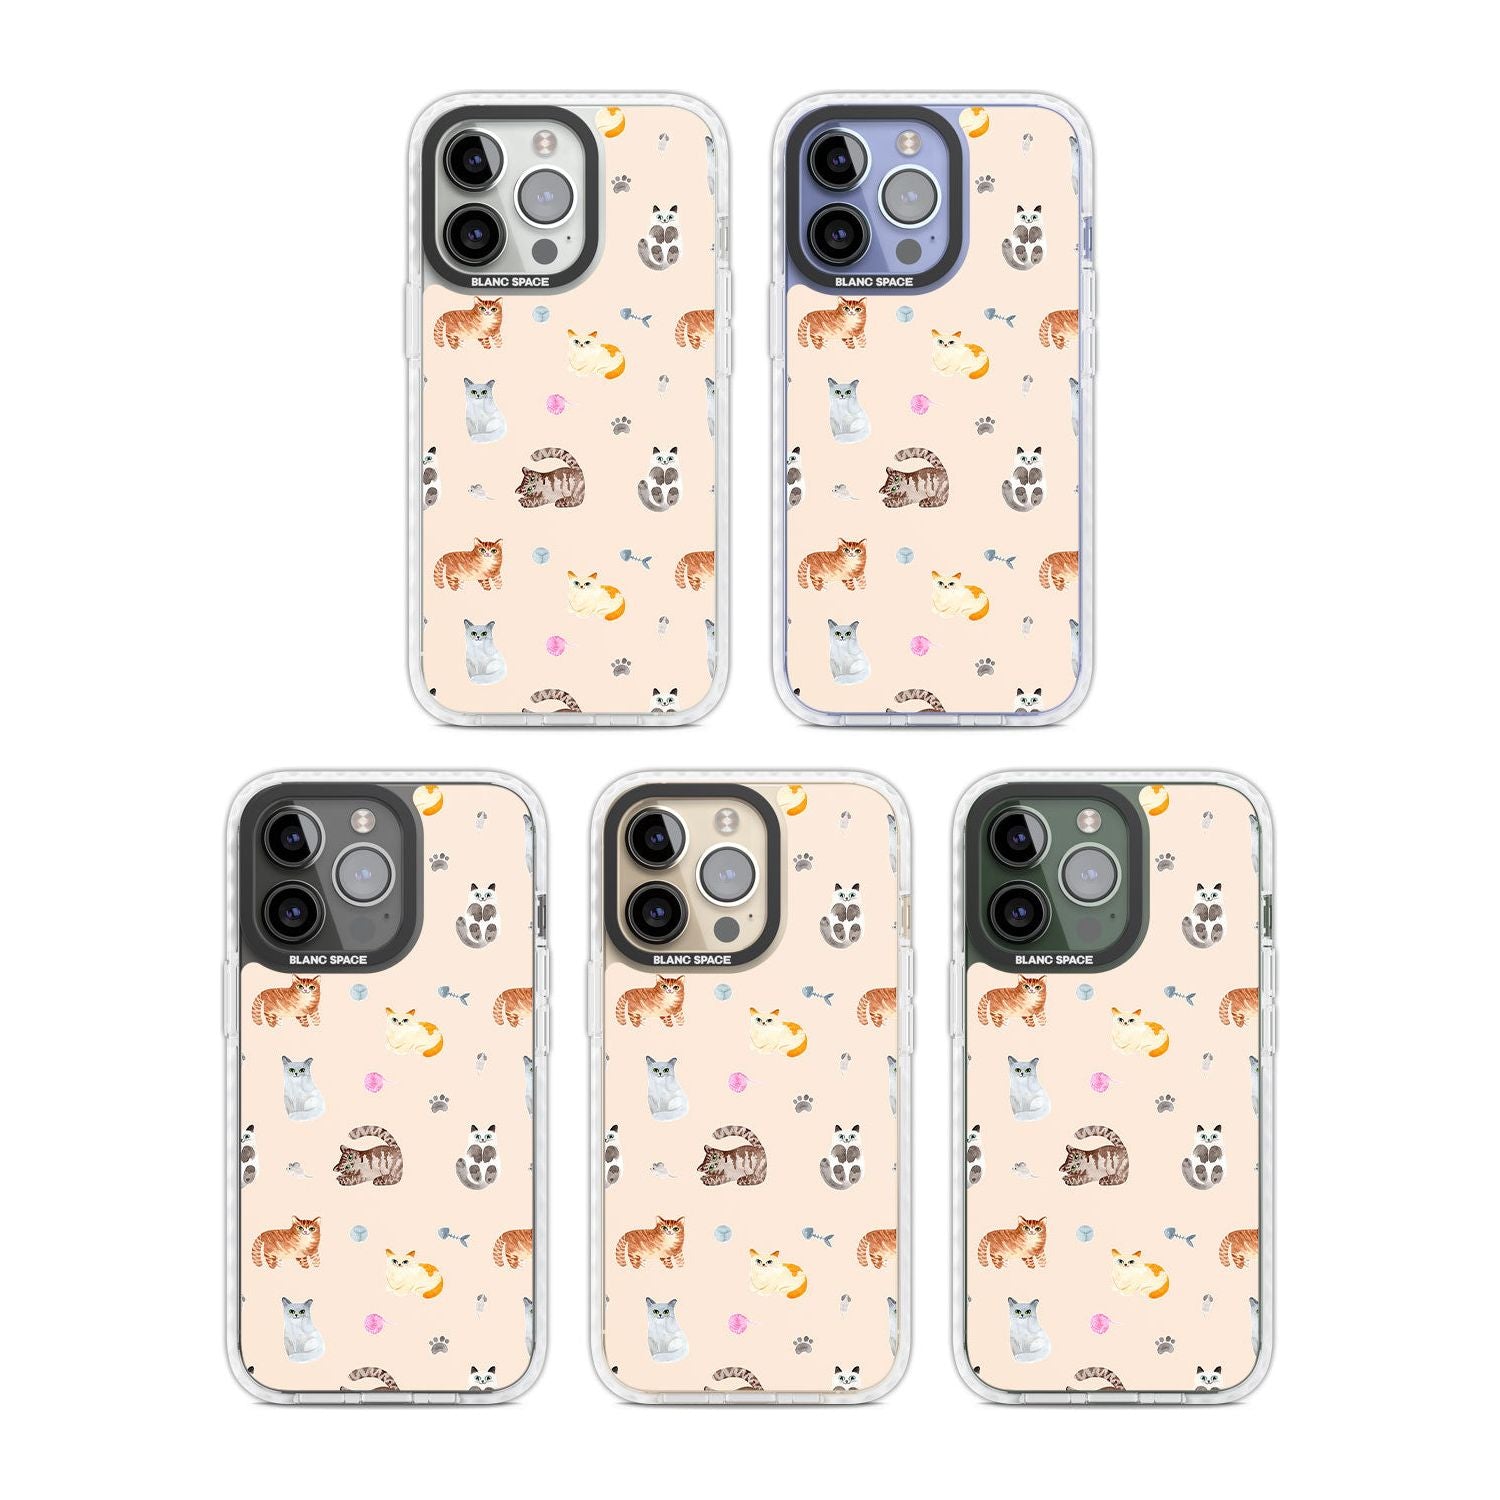 Cats with Toys Phone Case iPhone 15 Pro Max / Black Impact Case,iPhone 15 Plus / Black Impact Case,iPhone 15 Pro / Black Impact Case,iPhone 15 / Black Impact Case,iPhone 15 Pro Max / Impact Case,iPhone 15 Plus / Impact Case,iPhone 15 Pro / Impact Case,iPhone 15 / Impact Case,iPhone 15 Pro Max / Magsafe Black Impact Case,iPhone 15 Plus / Magsafe Black Impact Case,iPhone 15 Pro / Magsafe Black Impact Case,iPhone 15 / Magsafe Black Impact Case,iPhone 14 Pro Max / Black Impact Case,iPhone 14 Plus / Black Impact